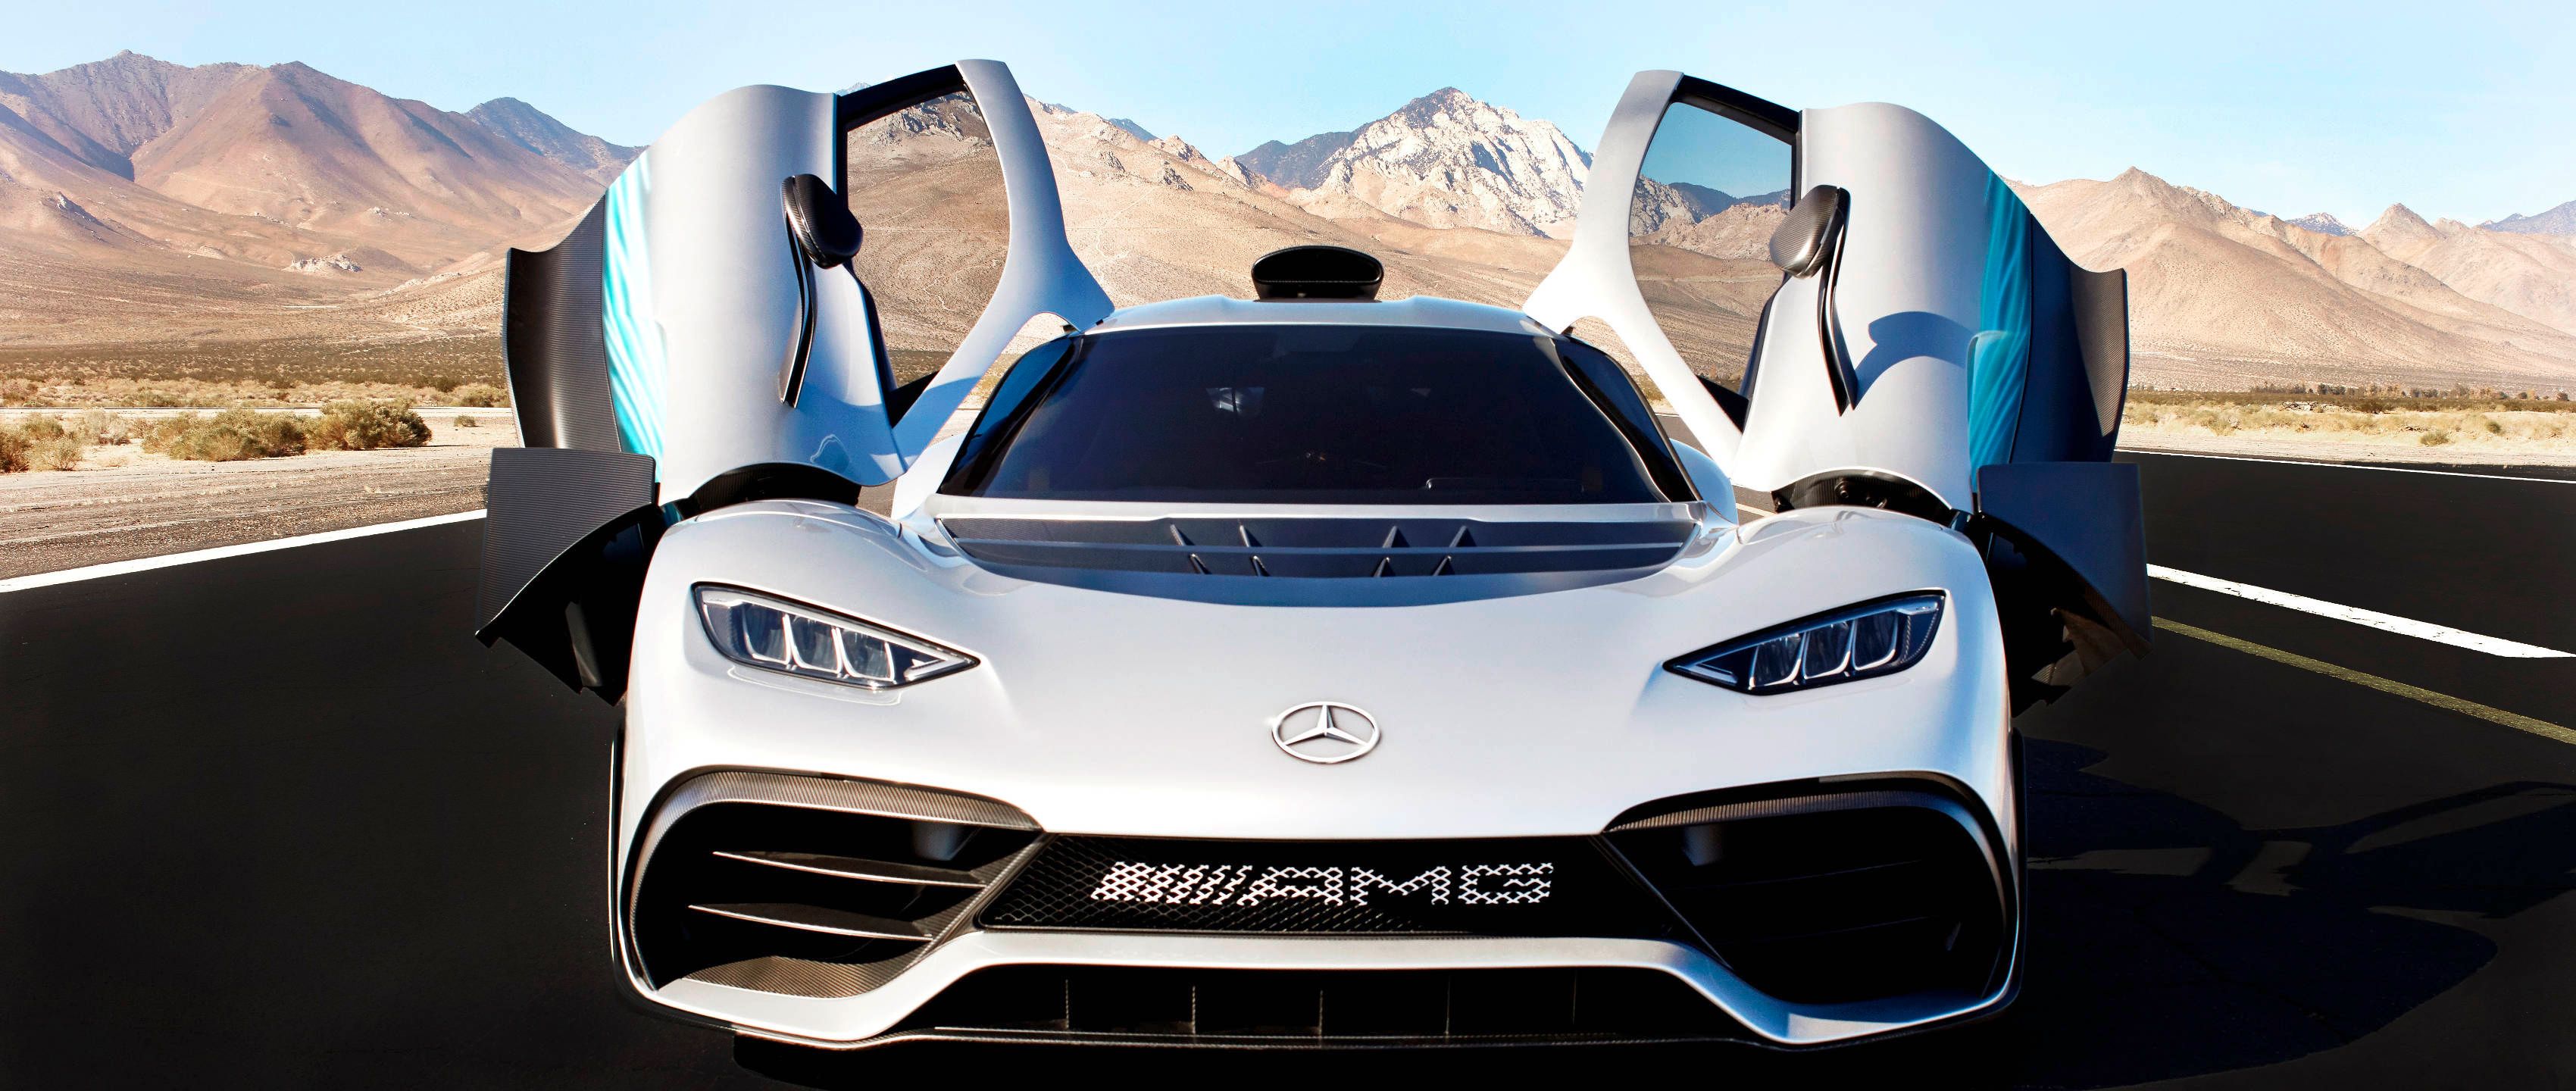 Mercedes-AMG One front view